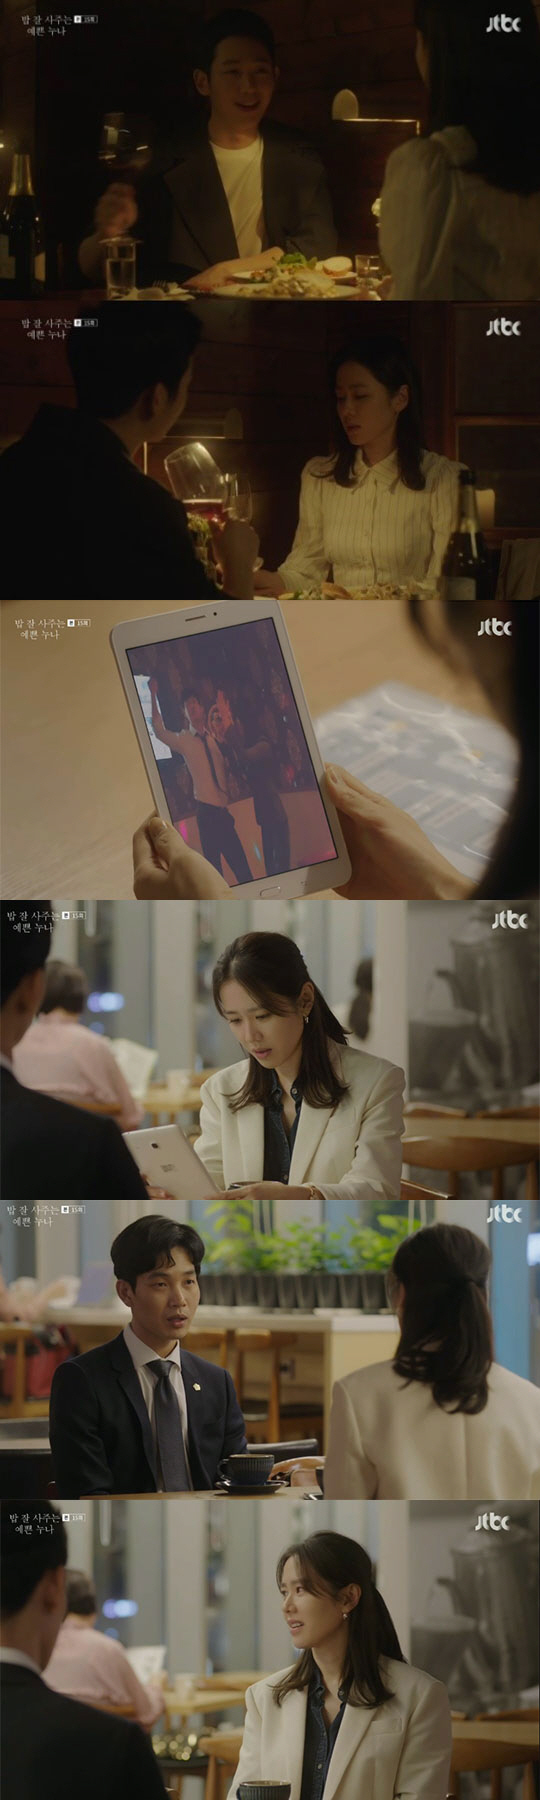 Pretty sister So-yeon Jang expressed a deep disappointment toward his friend Son Ye-jin.On the 18th, JTBCs Bobjalsaju is a pretty sister, Seo Jun-hee (Jung Hae In) asked Yon Jin-ah (Son Ye-jin) I applied for United States of America branch office.Lets quit the company and go with us, he suggested.Yoon Jin-ah, who signed the house, tried to show the contract - but Seo Jun-hee asked, Have you ever thought about quitting the company?I applied for United States of America office. Yoon Jin-ah asked, Do you want me to quit the company and go with you?Its like the best way to do it now, Seo Jun-hee said.Are you going to run away? asked Yoon Jin-ah, who replied, Please tell me youre going to get away.But Yoon Jin-ah said, Im fine now, I can live here, and Seo Jun-hee said, I just need me.I can not see more of it being hit and hit, said Seo Jun-hee. Lets talk about it after going on a business trip. Yoon Jin-ah then met with Seo Kyung-sun, who expressed deep disappointment at the words of Yoon Jin-ah, I am ahead of Jun-hee.Seo Kyung-sun was furious, Seo Jun-hee is alone? You want to live with Yoon Jin-ah? Yoon Jin-ah replied, I want more.But Seo Kyung-sun asked, Did I change and I did not know you? And Yoon Jin-ah replied, Think of it either way.But Seo Gyeong-seon got up and went out, saying, Can I be disappointed with Yoon Jin-ah?.Yoon Jin-ah, who drank alone, became independent of his chosen home; Yoon Jin-ahs father was low-pitched in a room without a daughter.